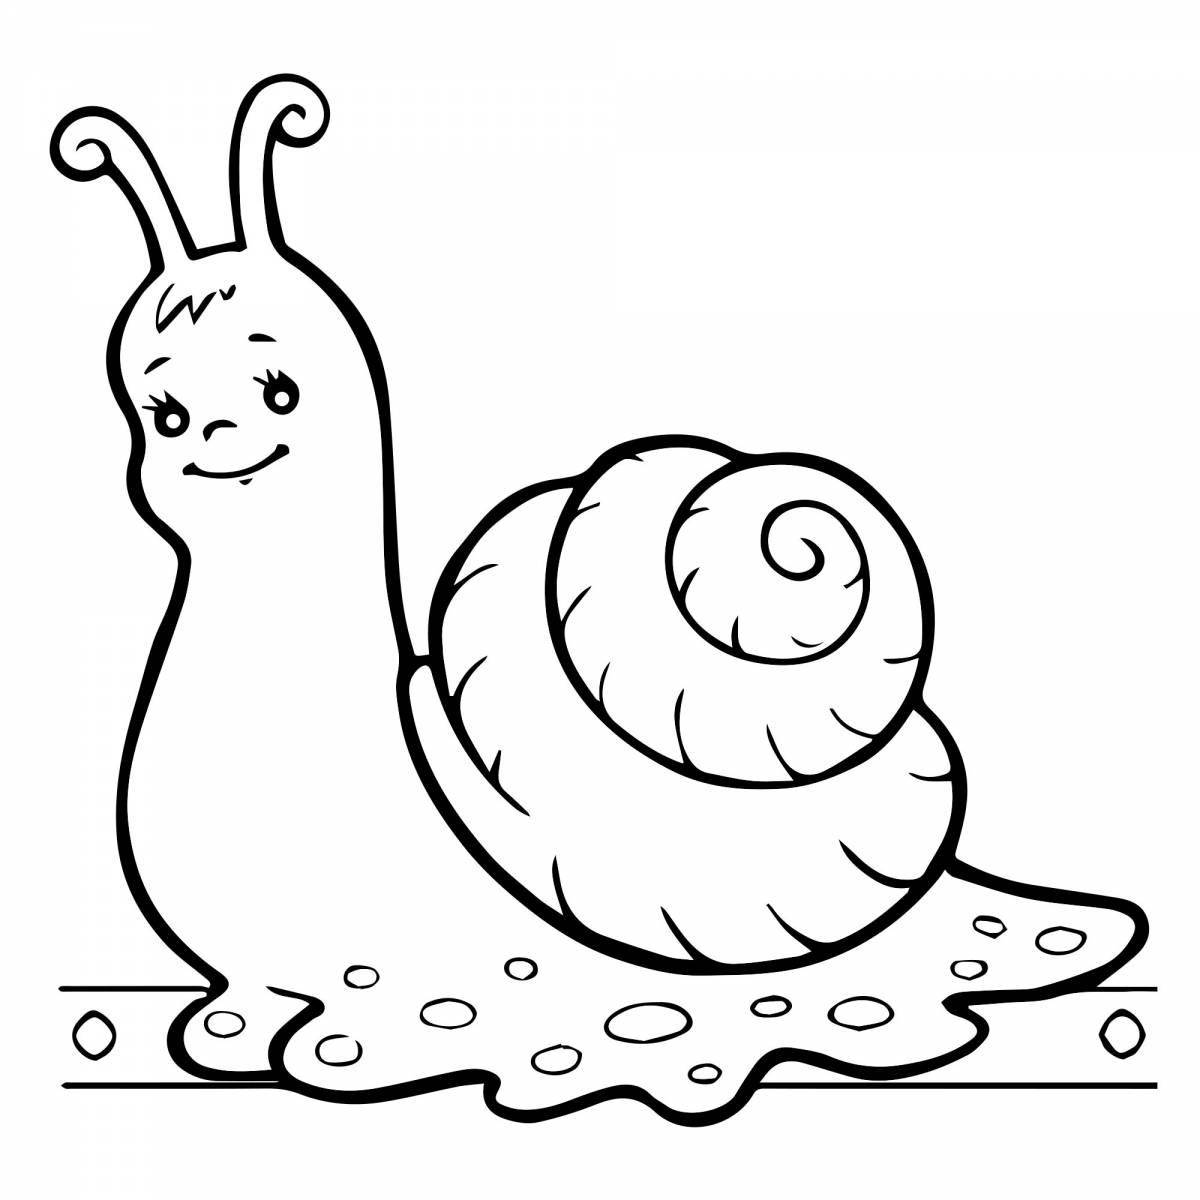 Animated snail coloring page for kids